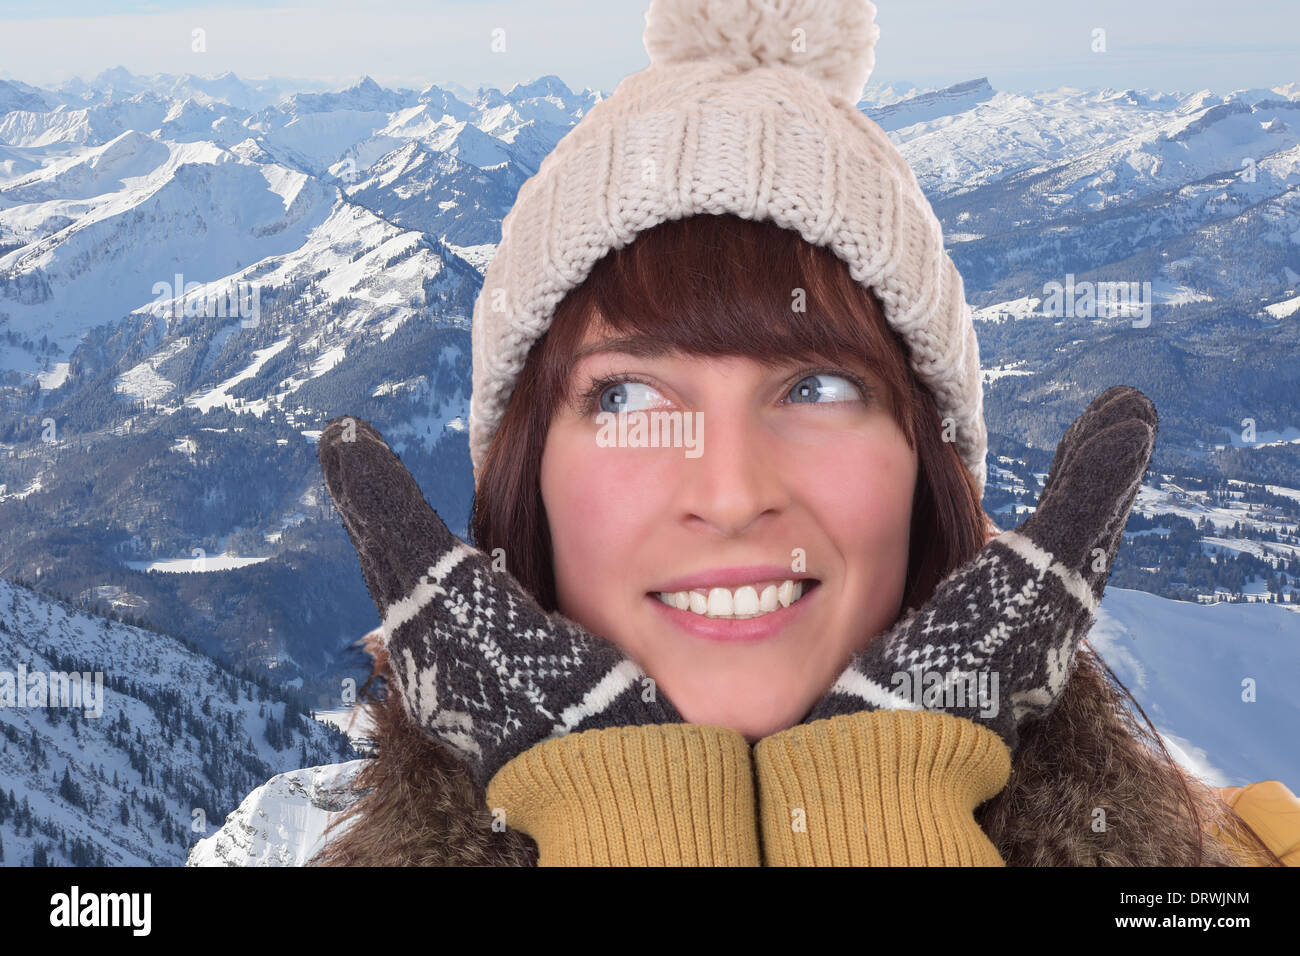 Portrait of a happy woman in winter with gloves and cap in the mountains Stock Photo